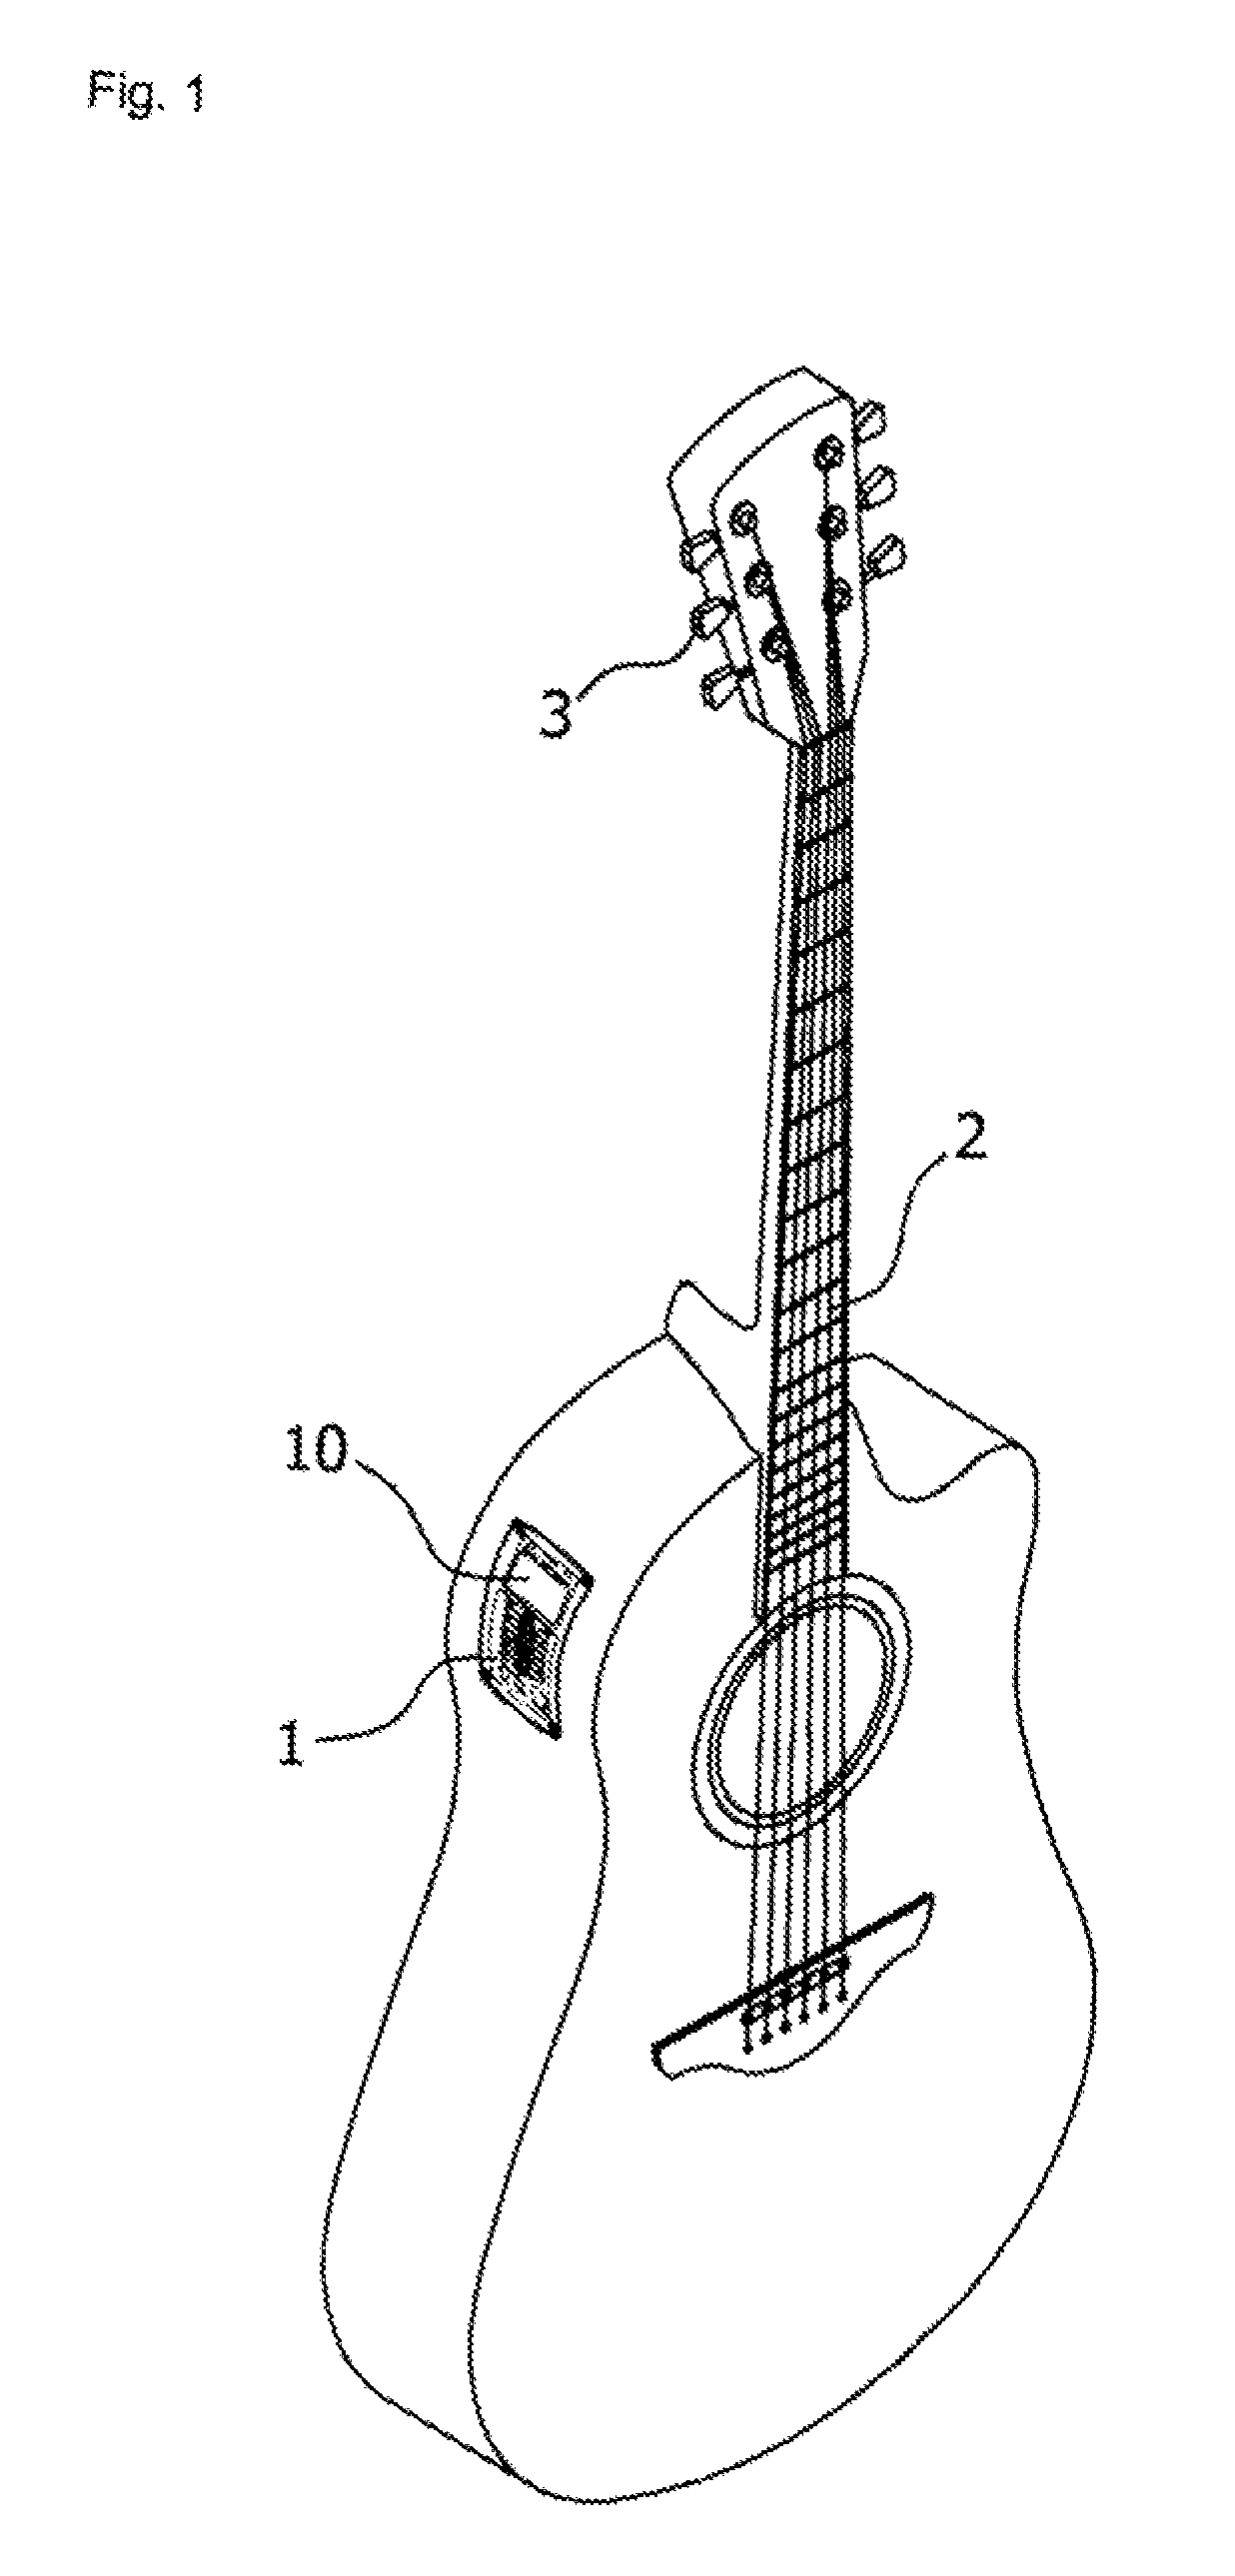 Display device for guitar tuners and method of displaying tuned states of guitar strings using the same